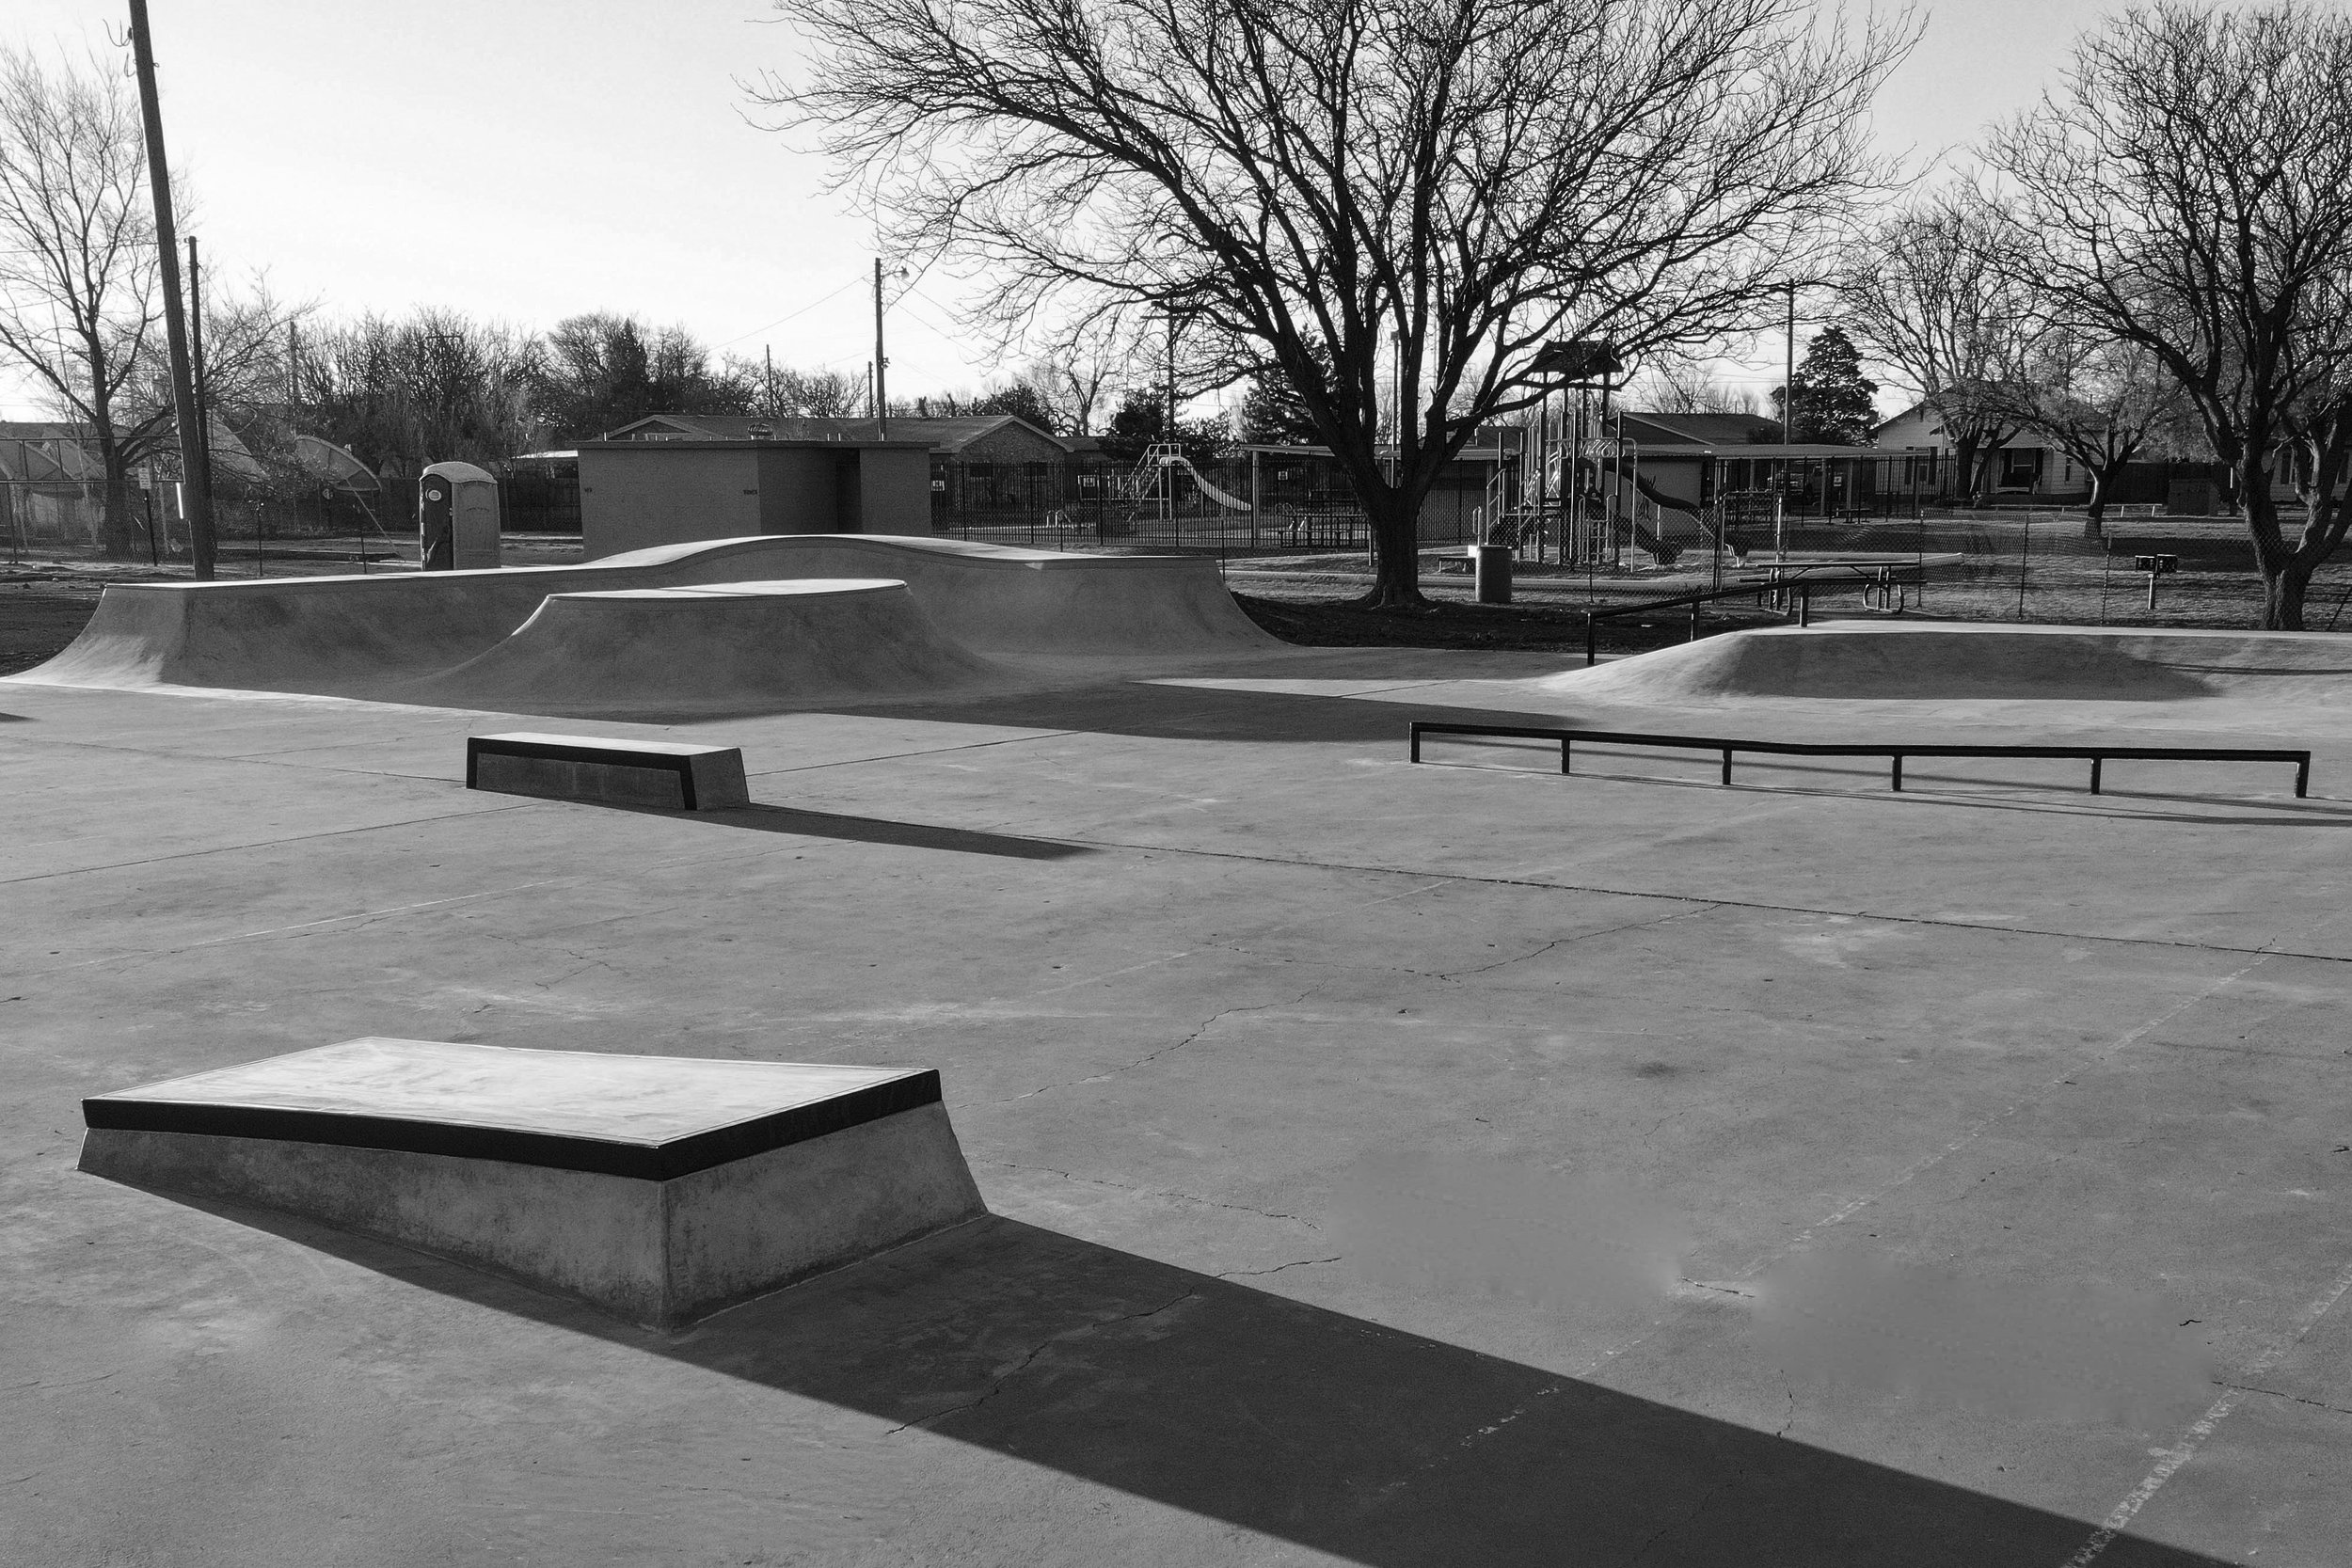 Idalou, Texas Skatepark ☀️a fun little park &amp; another example of one of our #skateparkrecycling ♻️projects 